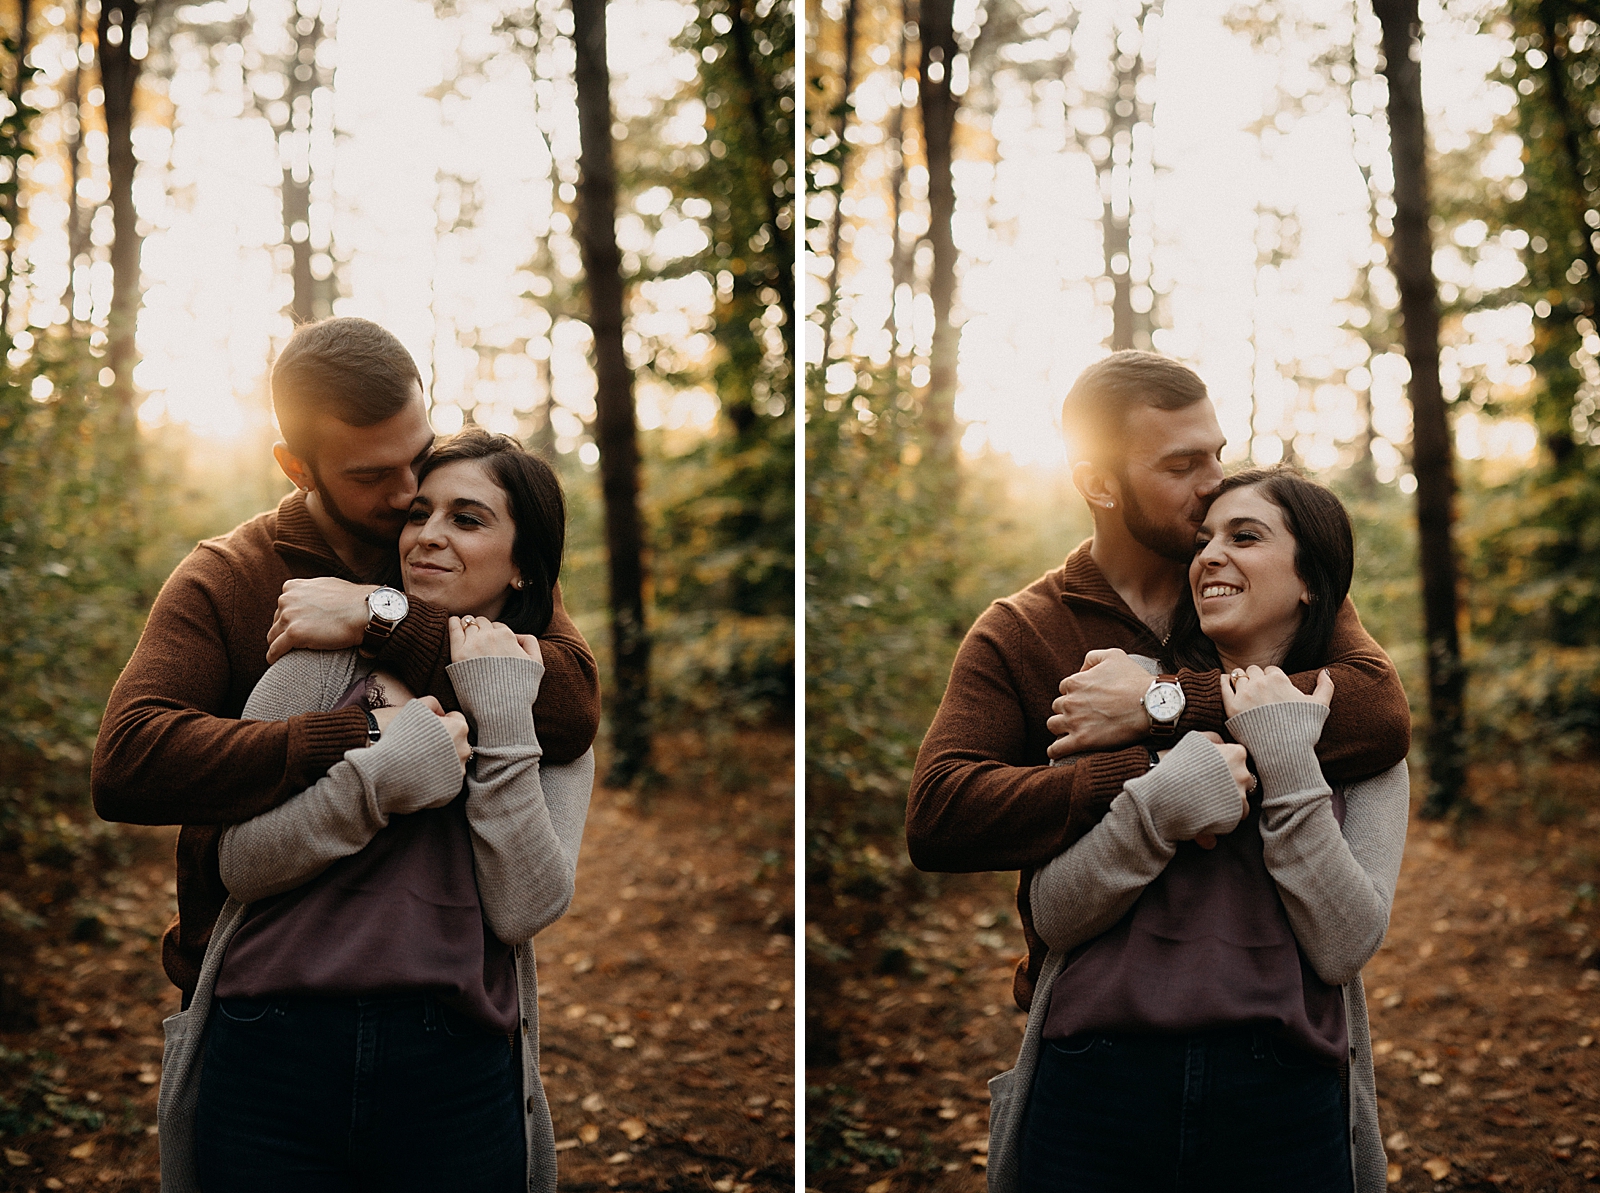 Man holding woman from behind in fall forest with sun shining through trees